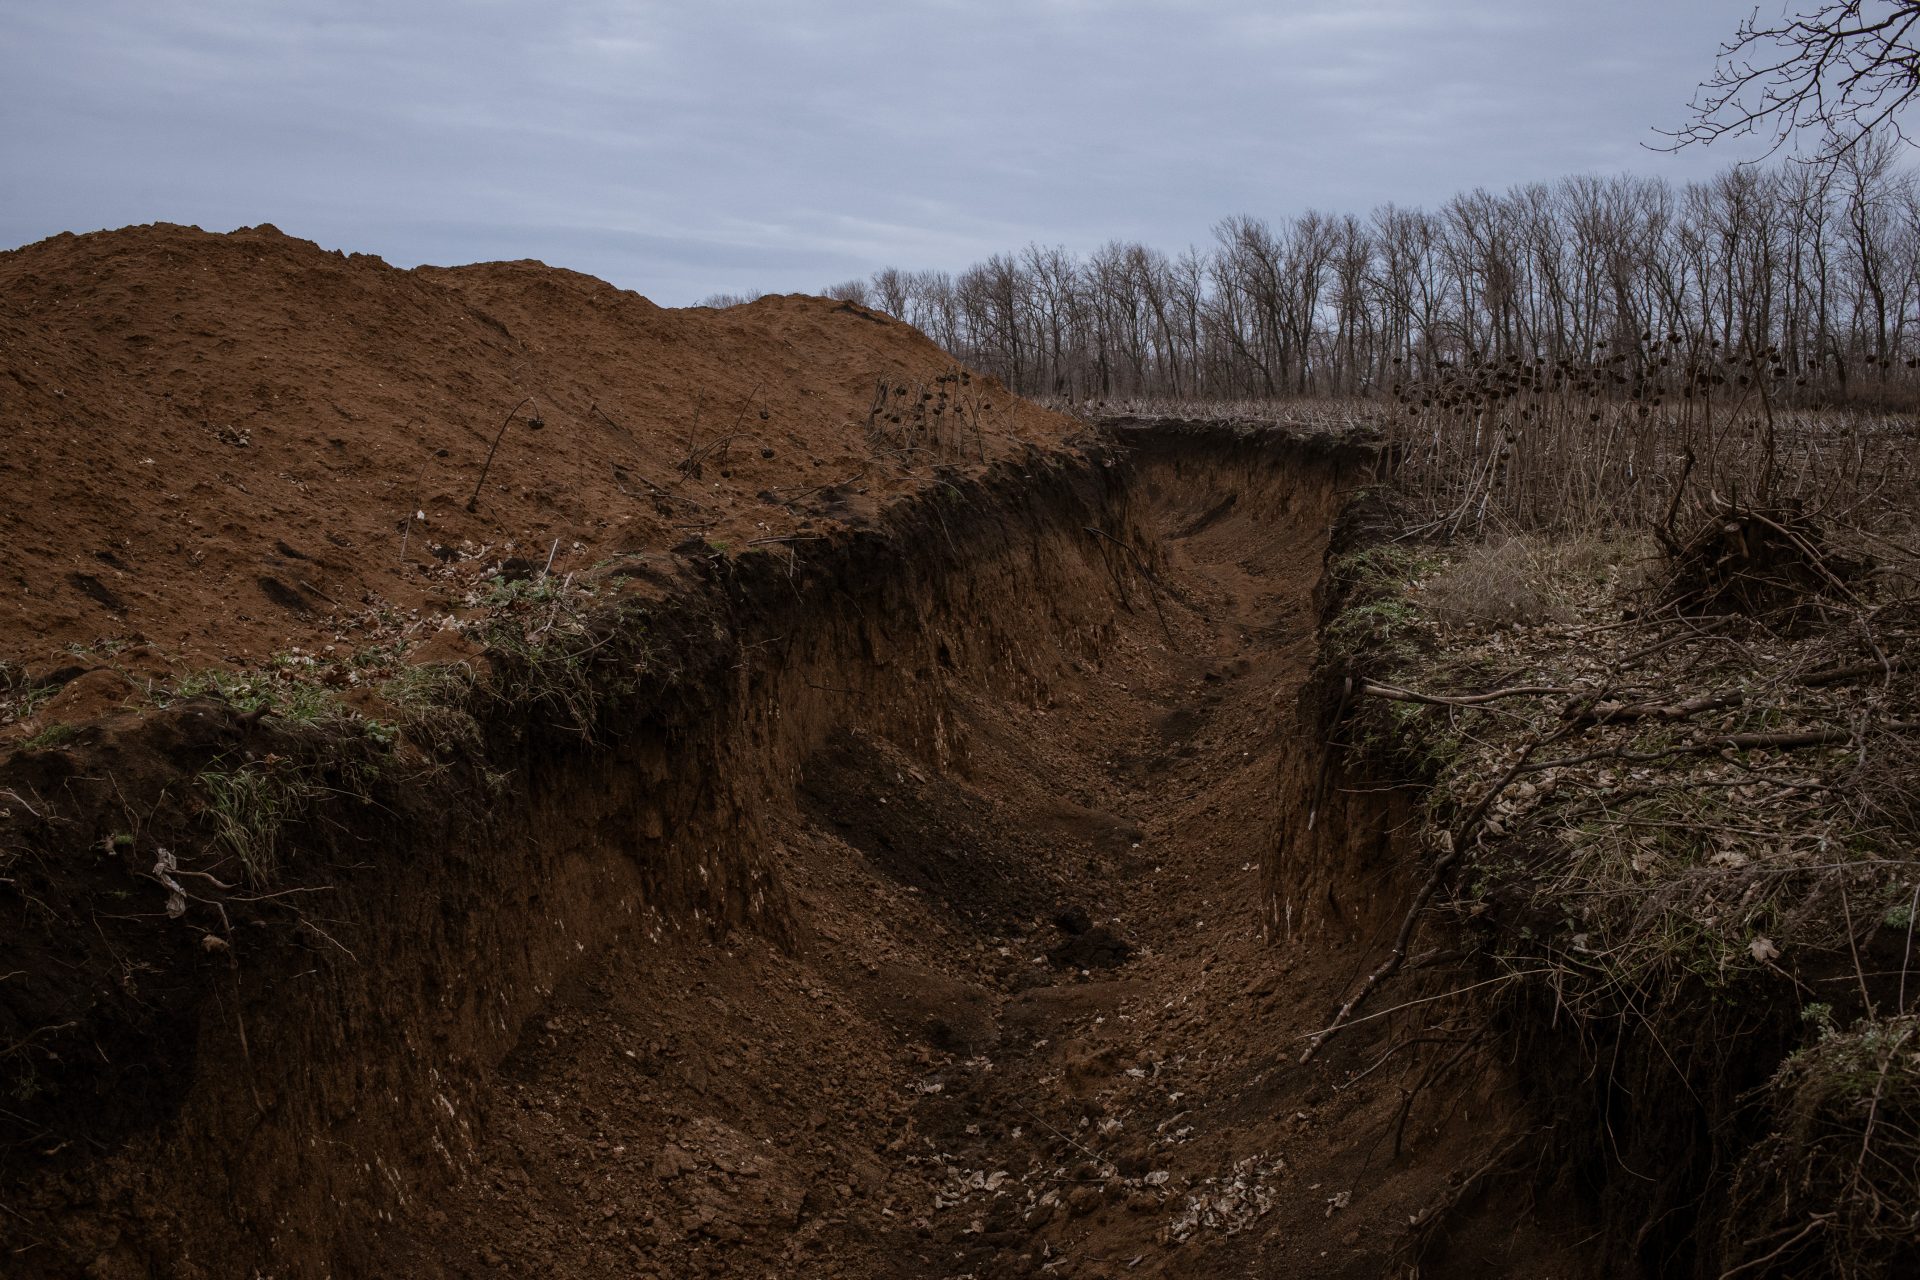 An order to dig trenches led to a horrific surprise for Russian soldiers